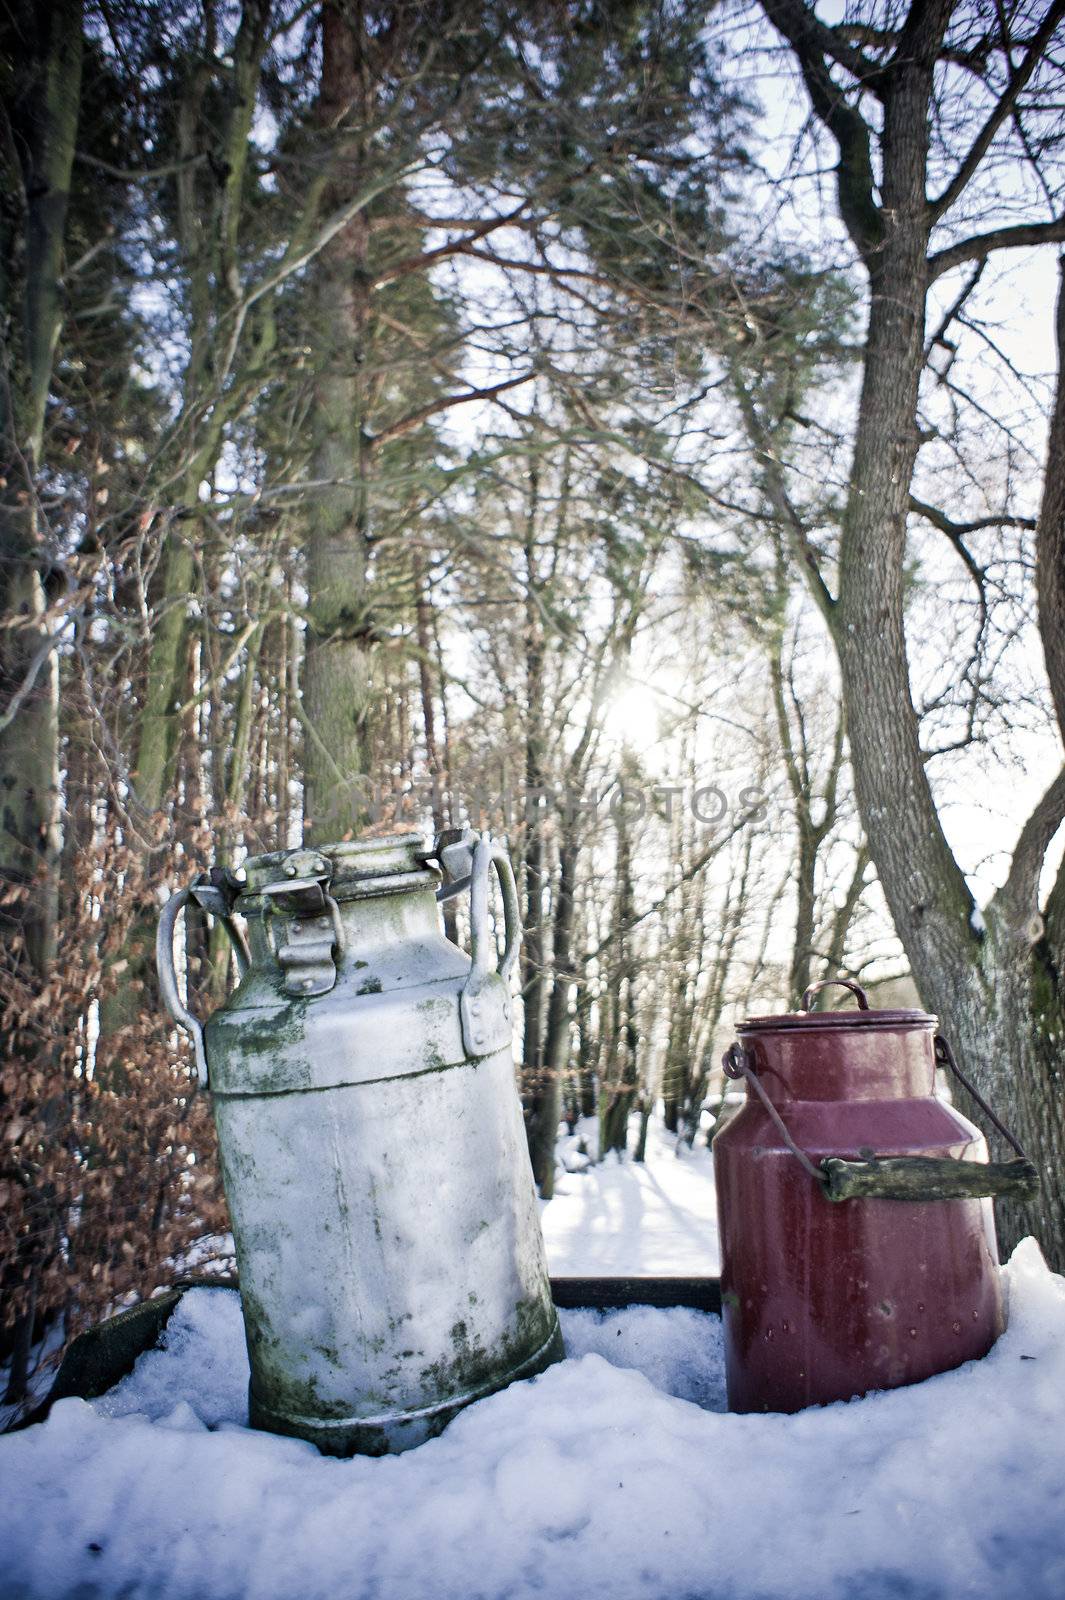 Nostalgic Milk Cans in Winter Landscape waiting for refill